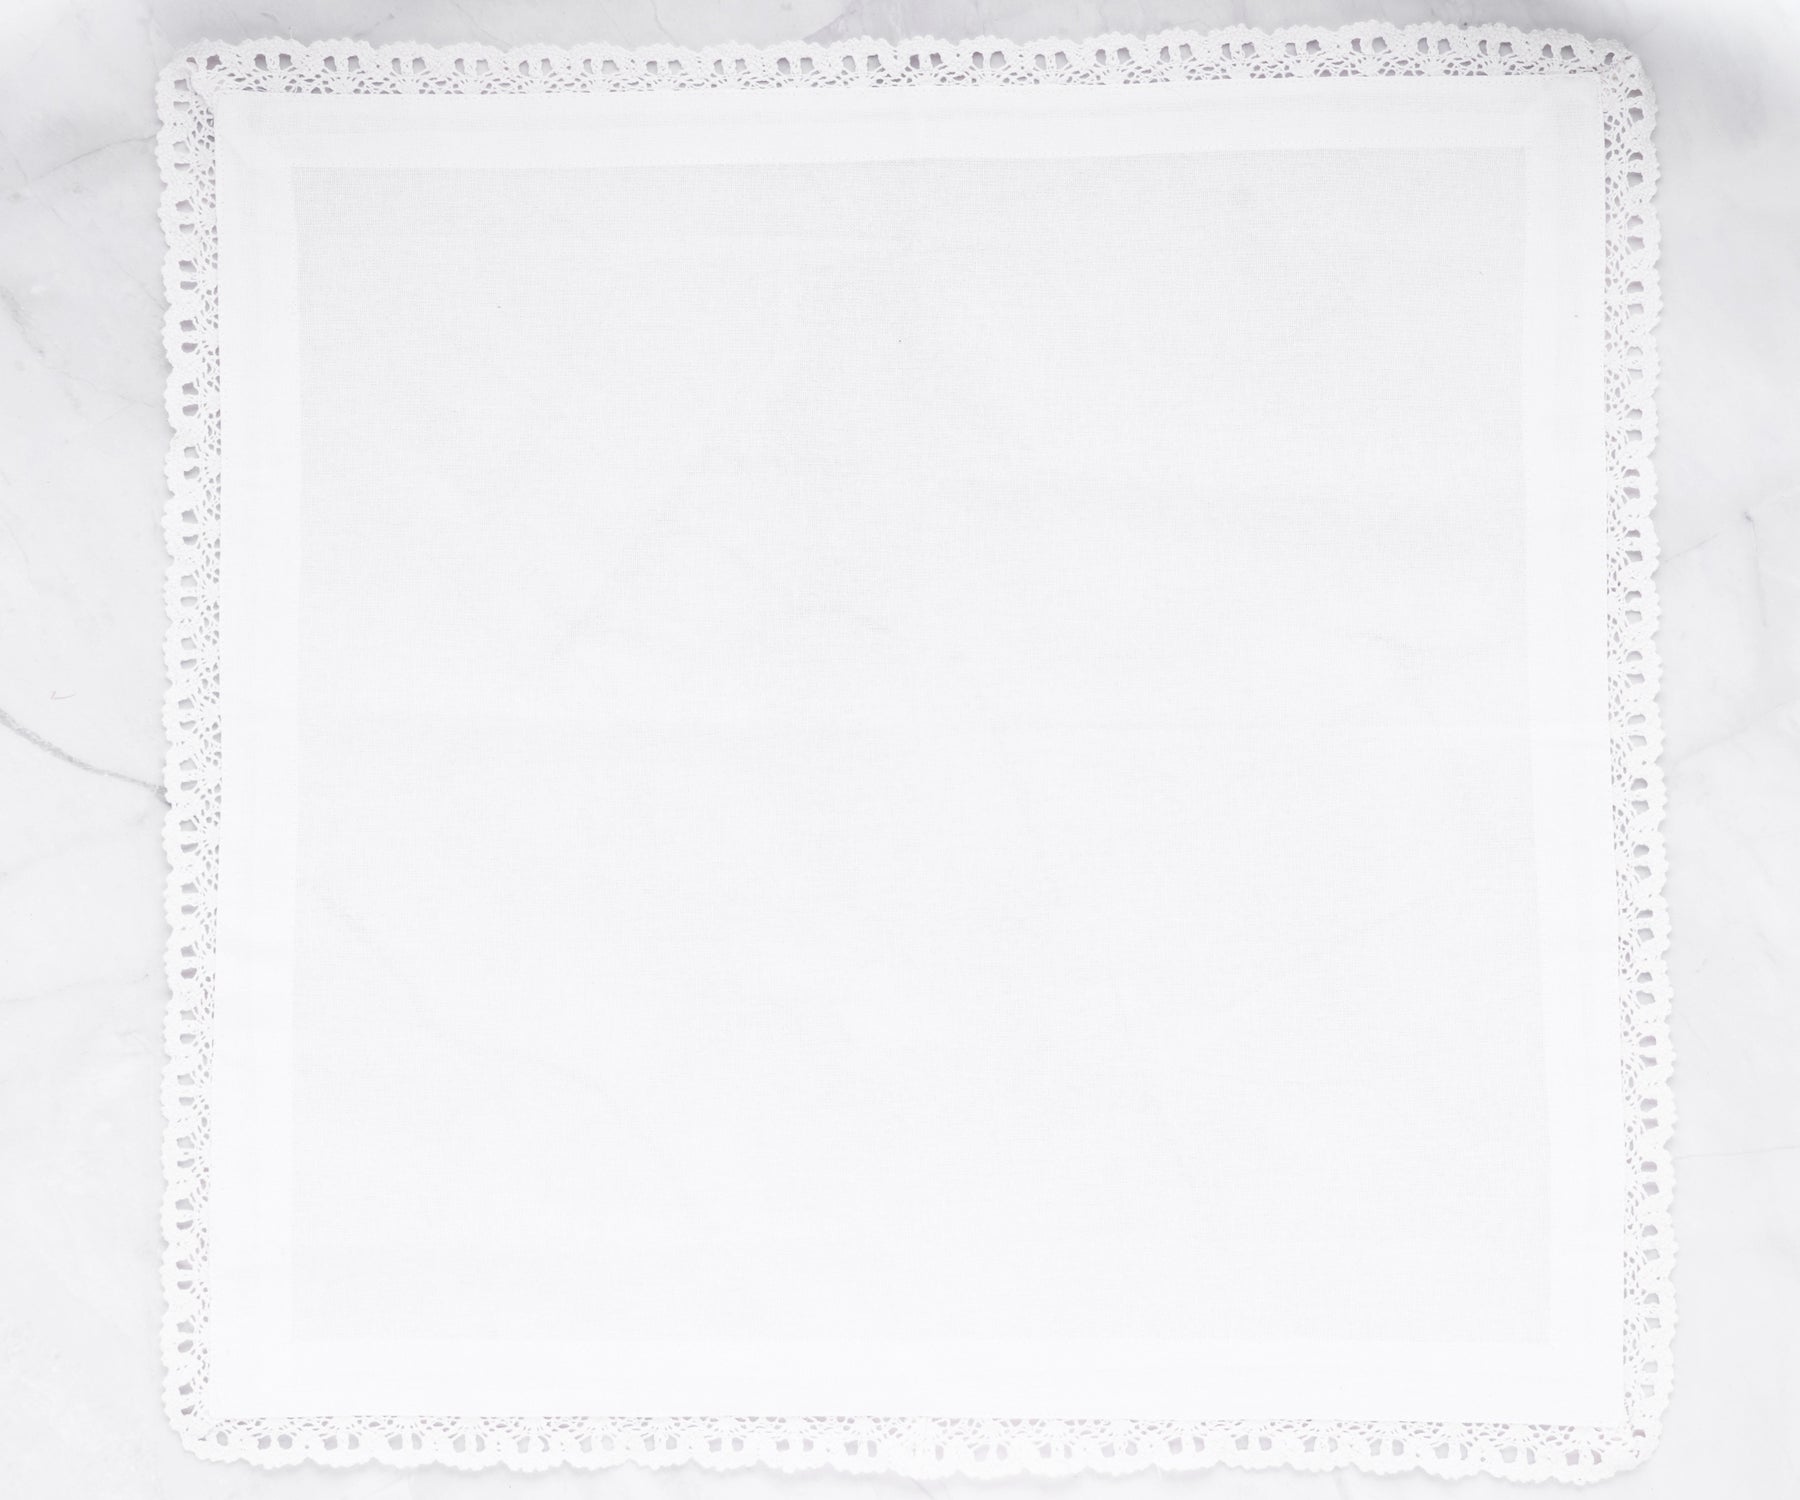 Cloth napkins set of 6, a convenient bundle for hosting, ensures you have ample options for guests at your dining table.